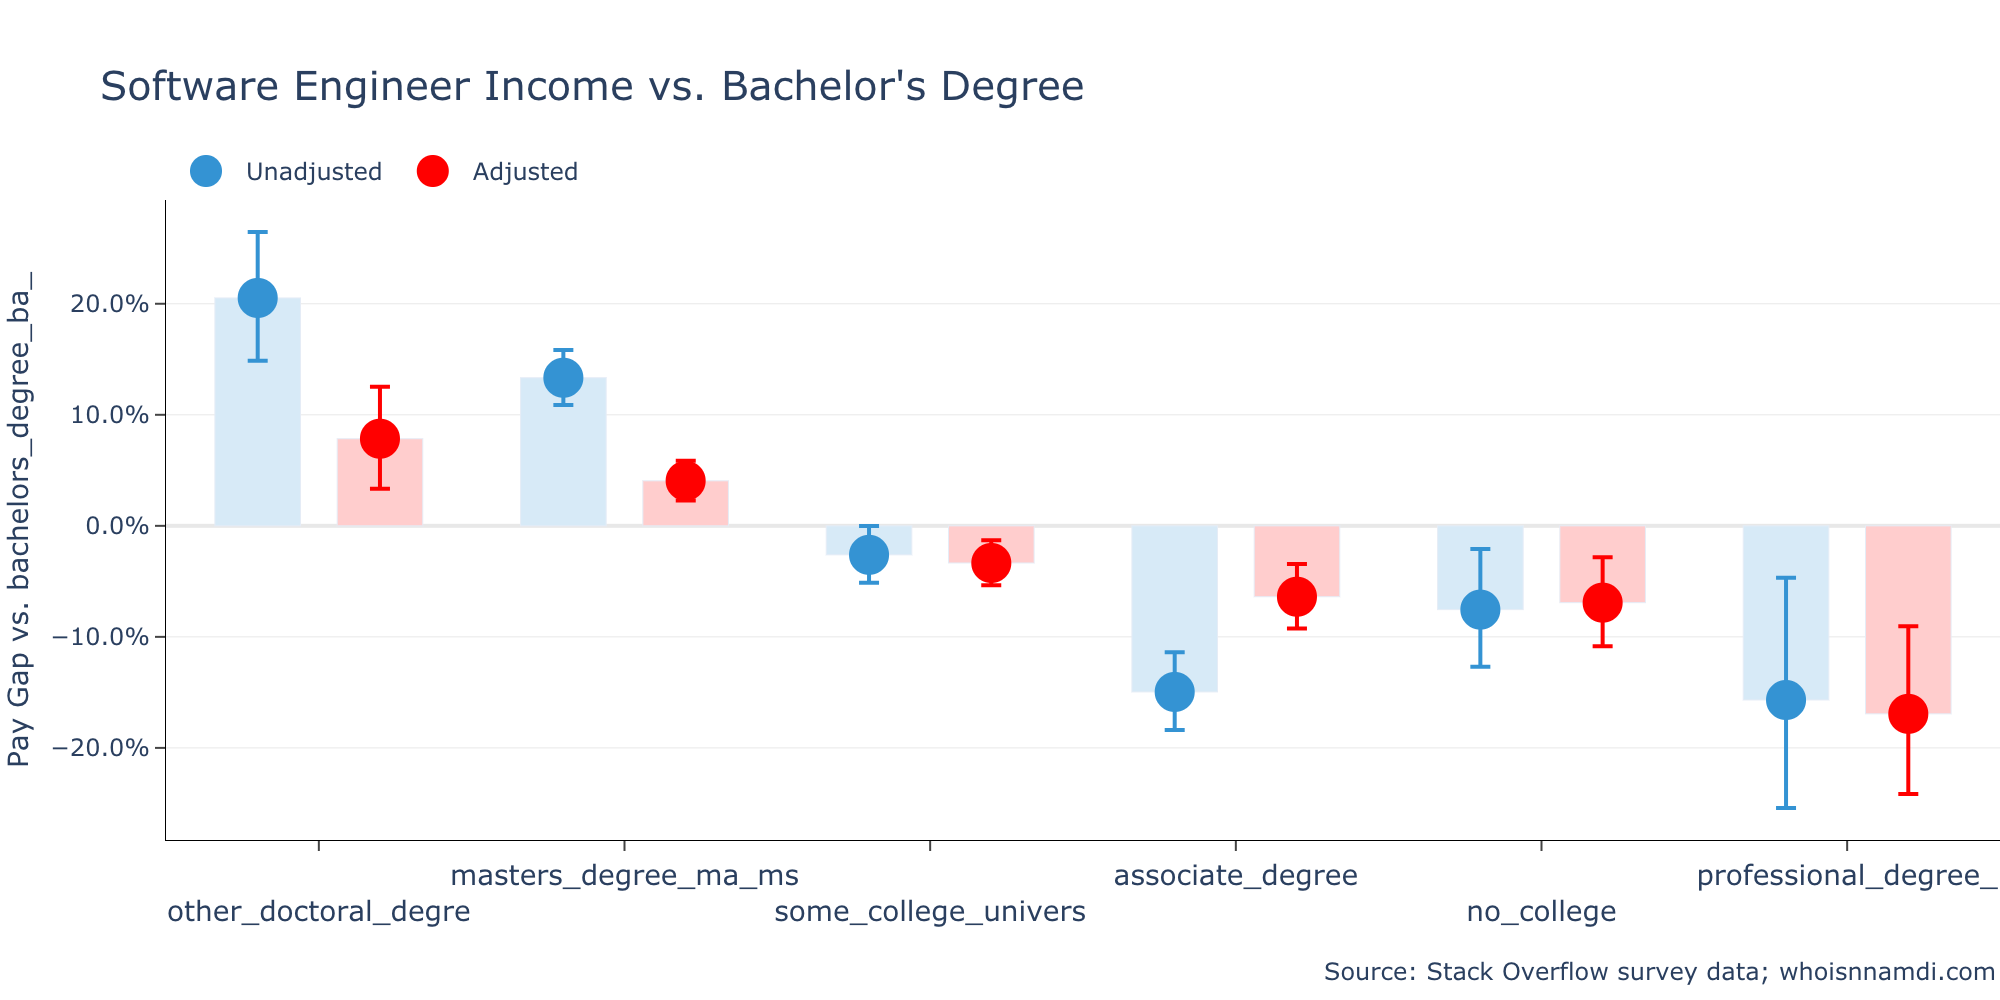 Do College Degrees Matter for Software Engineers? Maybe